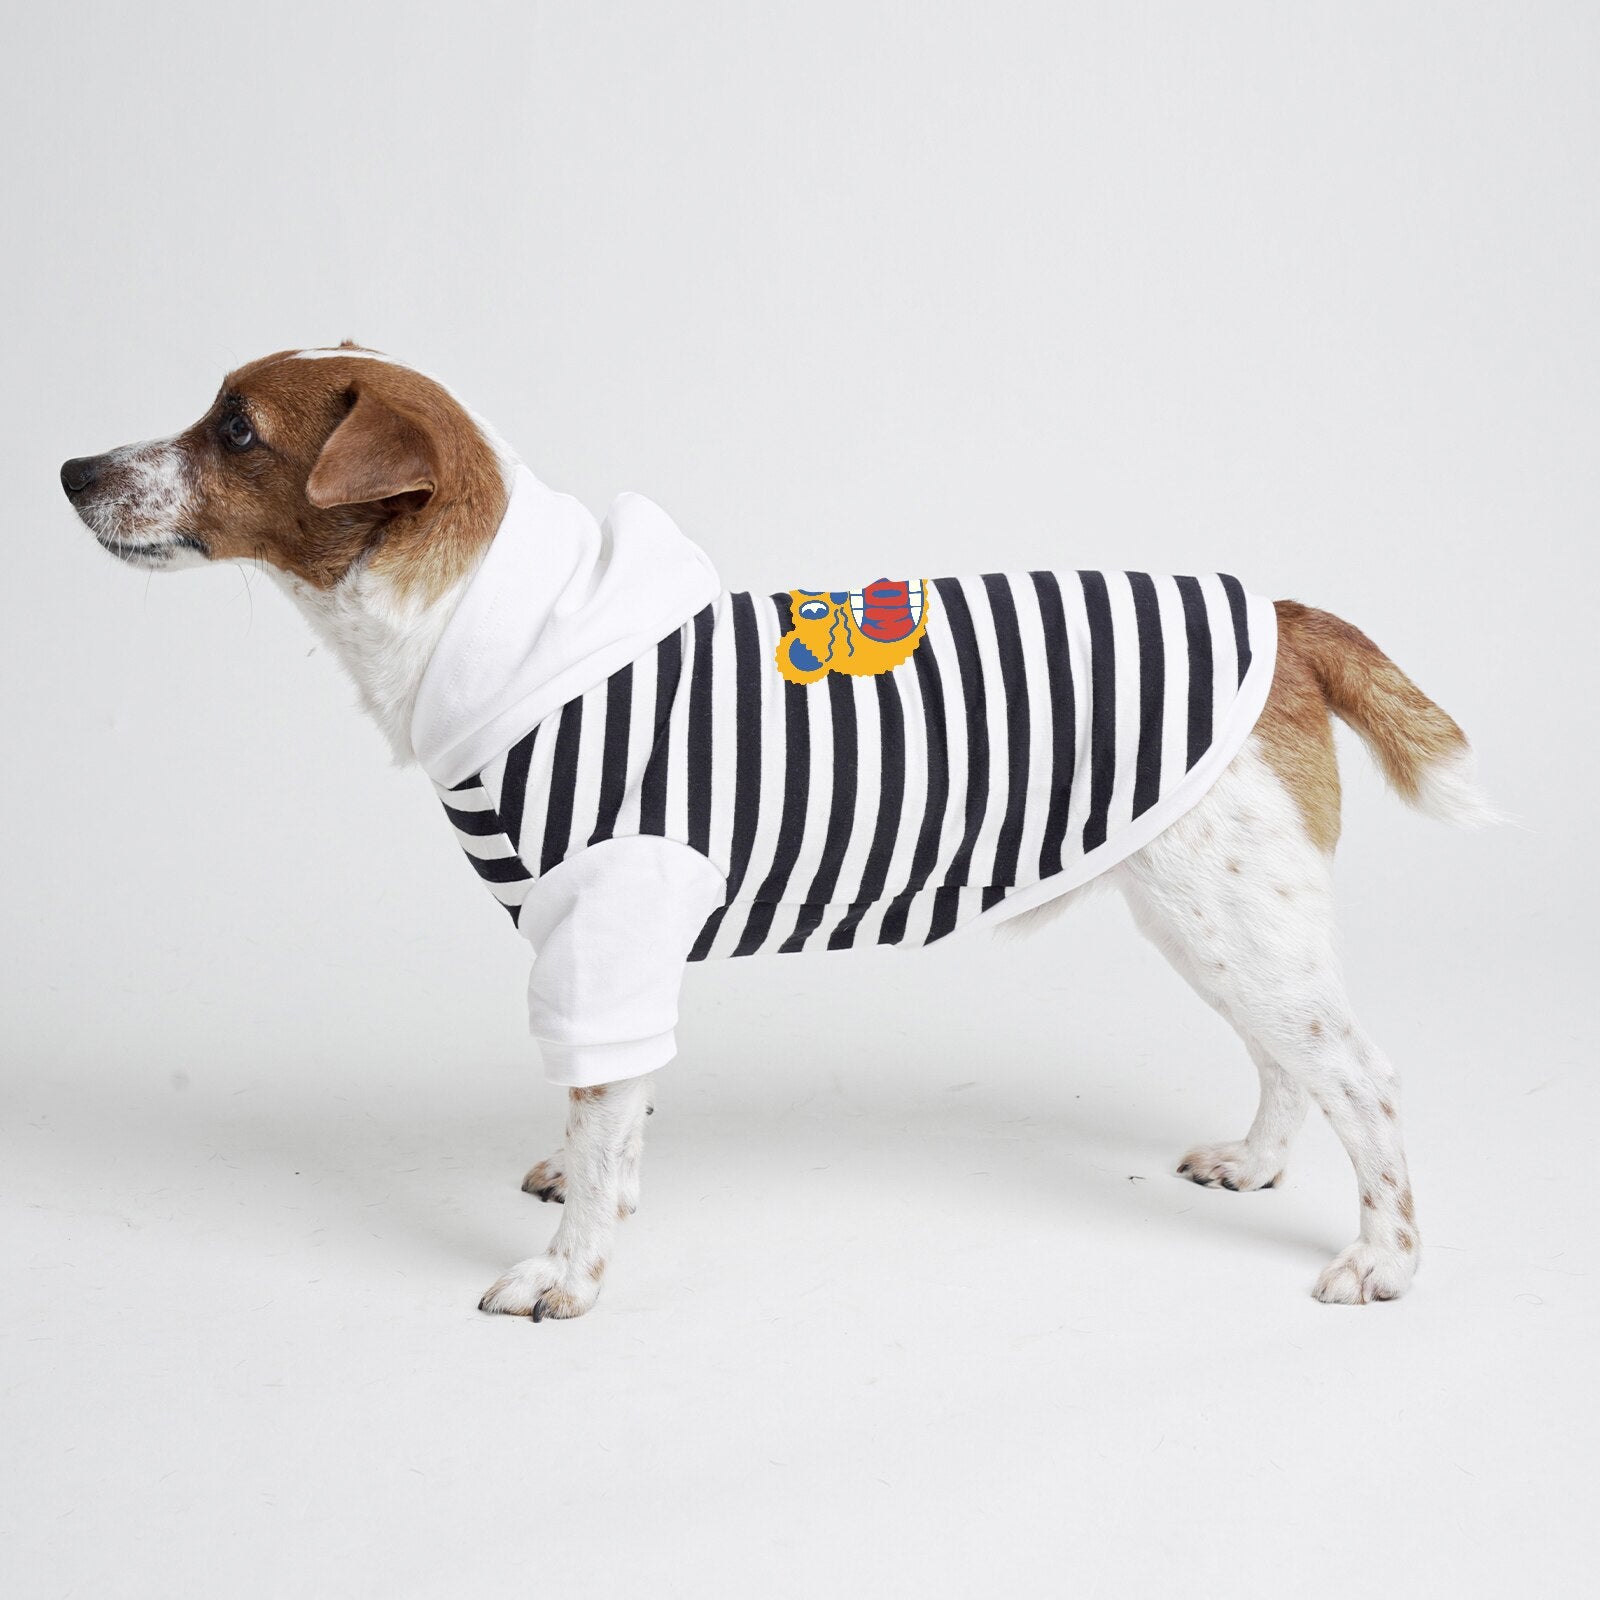 Cute 'Tiger' Printed Clothes for All Dogs, Hoodies with Leash Hole, Soft and Durable Fabric and Good Quality Cotton